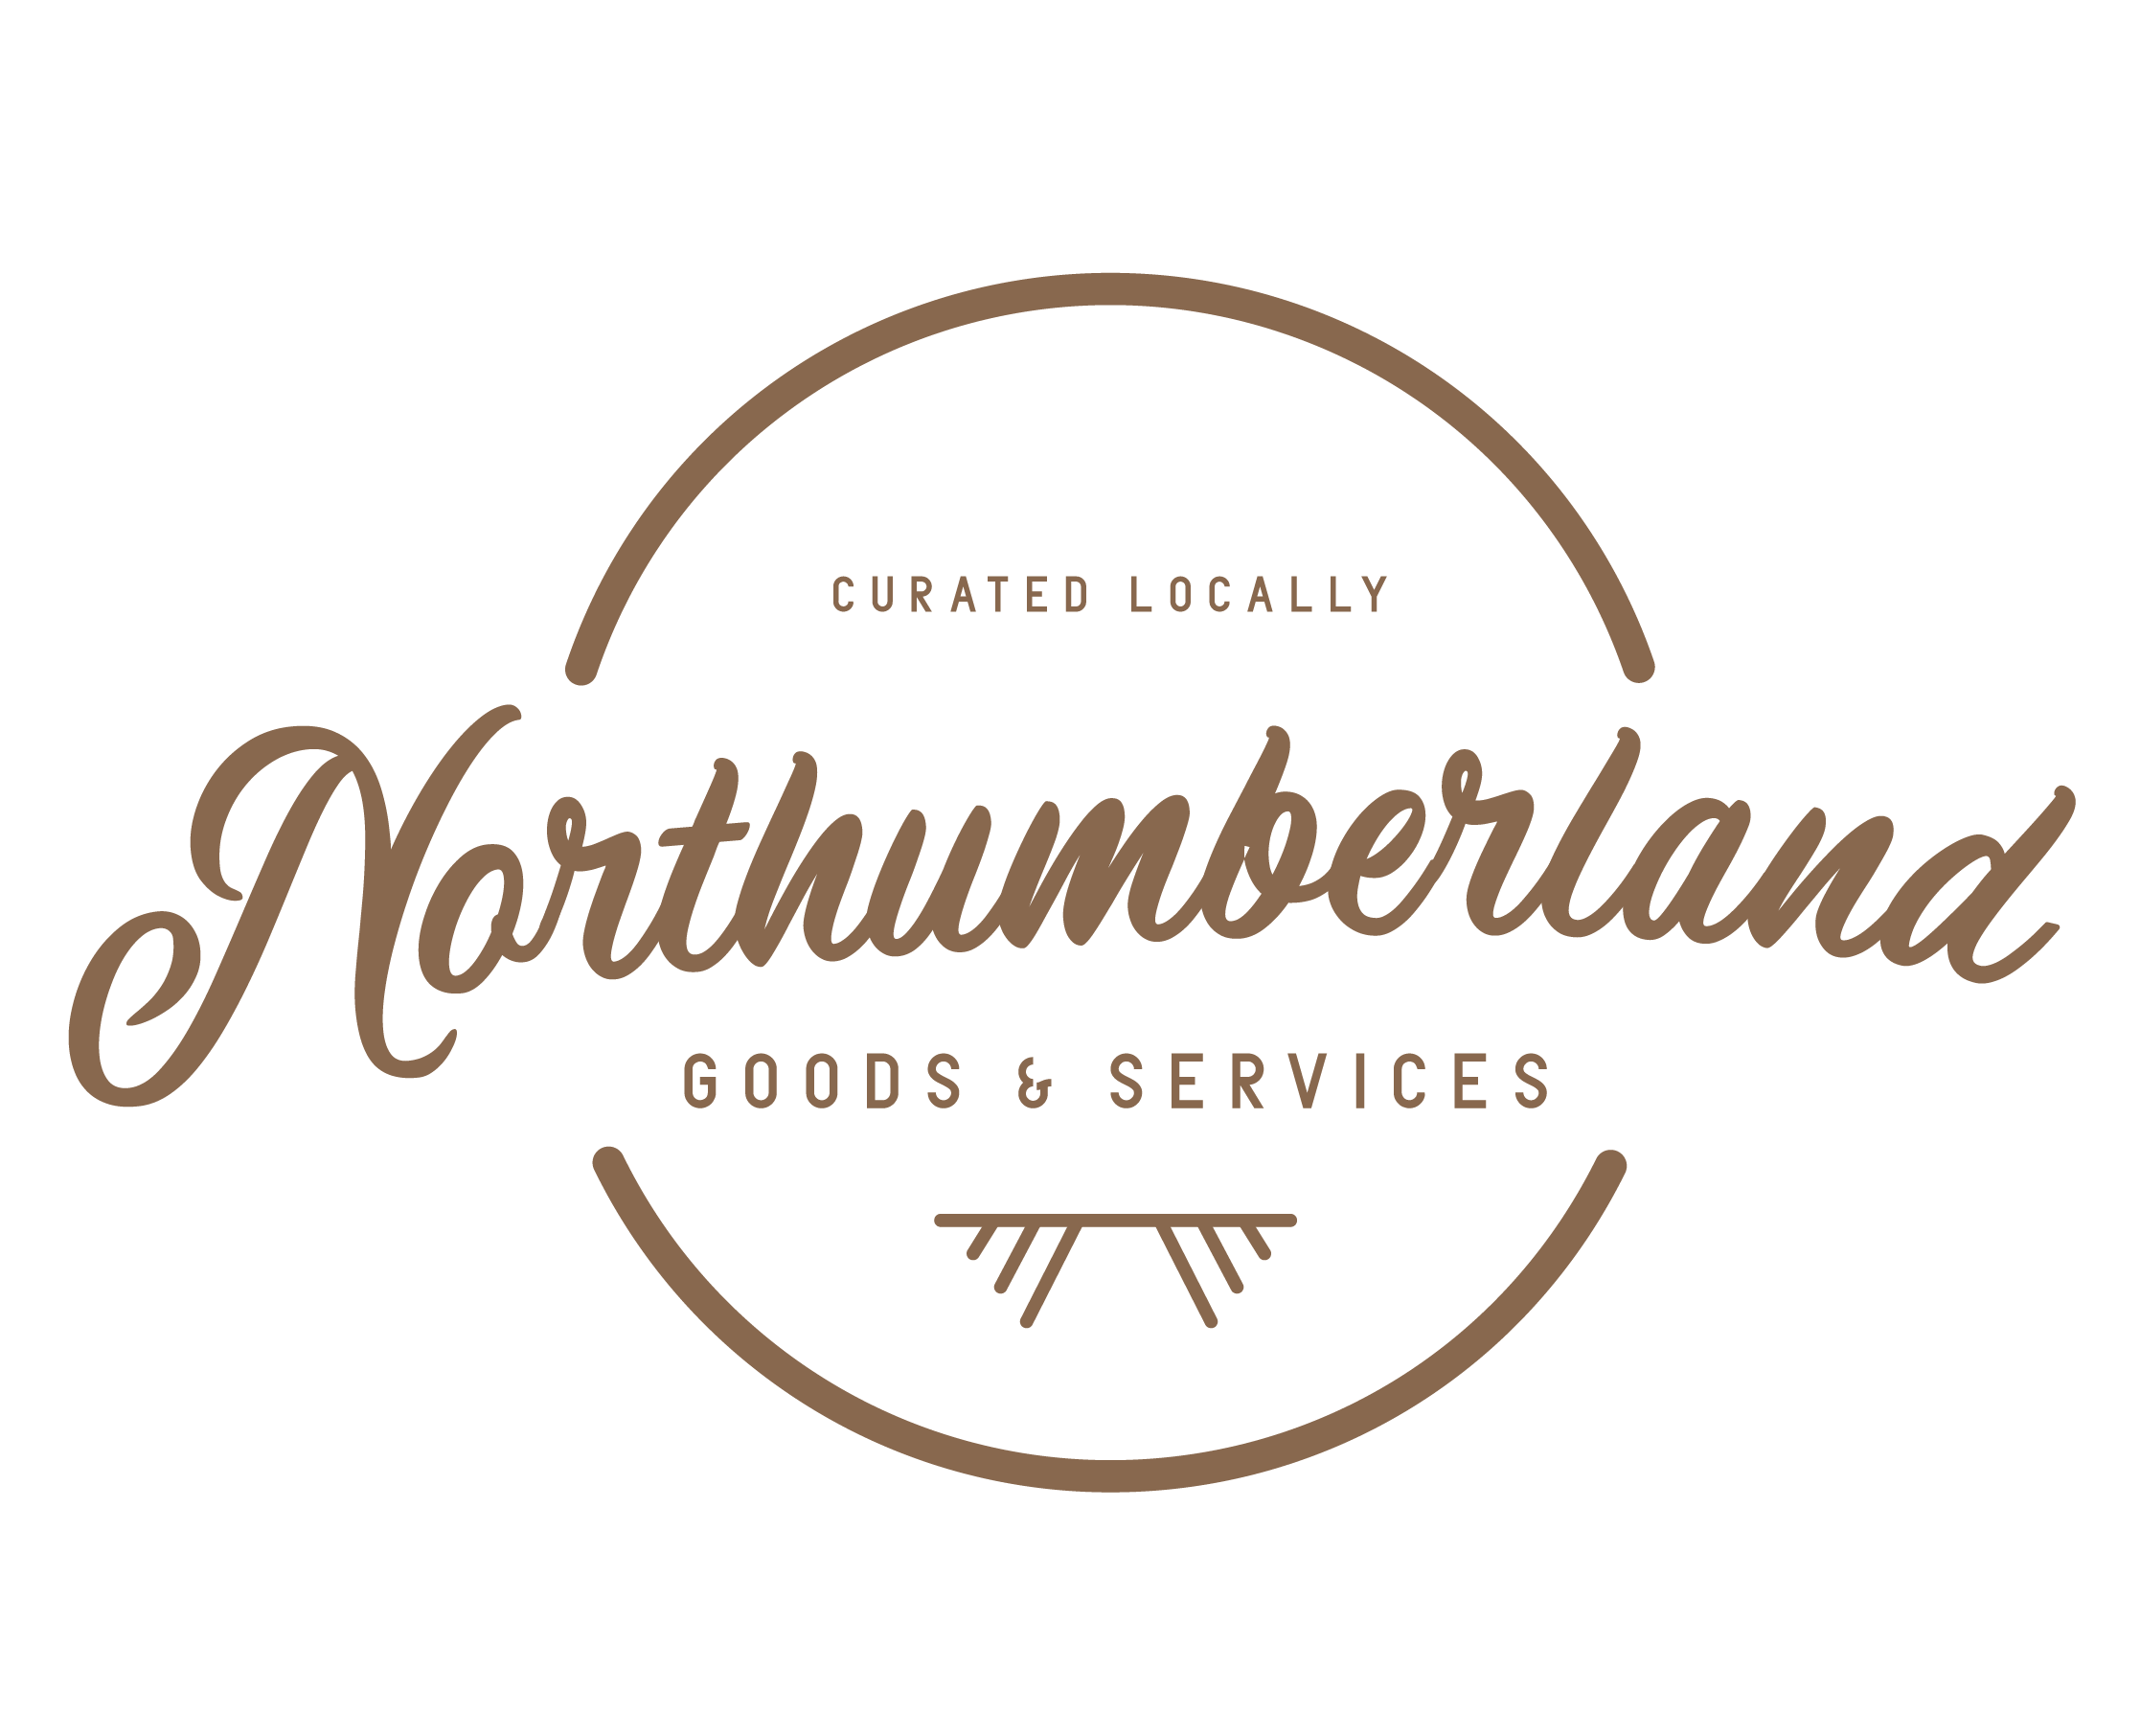 Northumberland Goods and Services